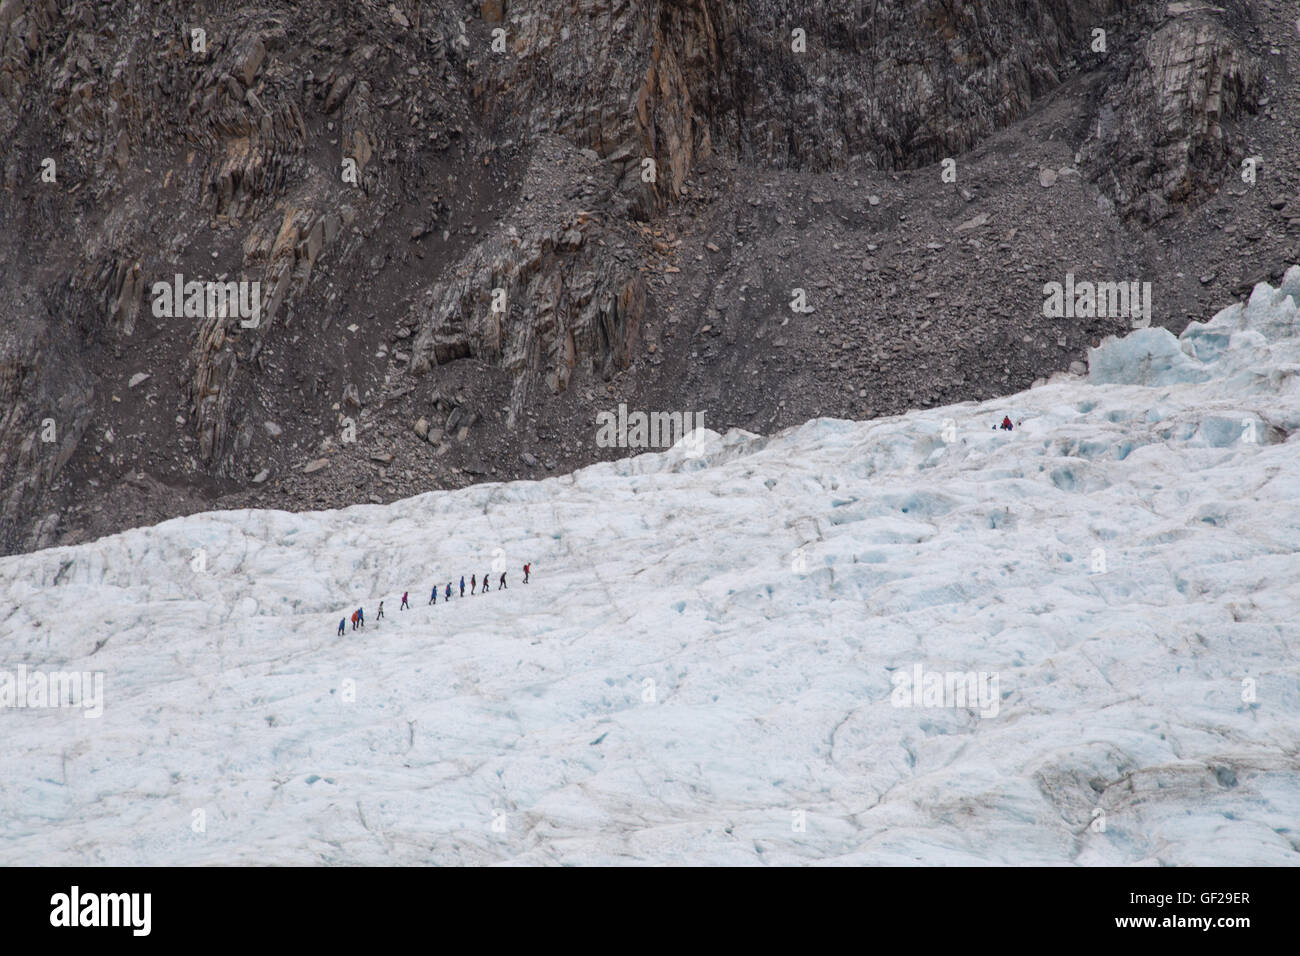 Franz Josef, New Zealand - March 22, 2015: A group of tourists hiking in the distance on Franz Josef Glacier. Stock Photo